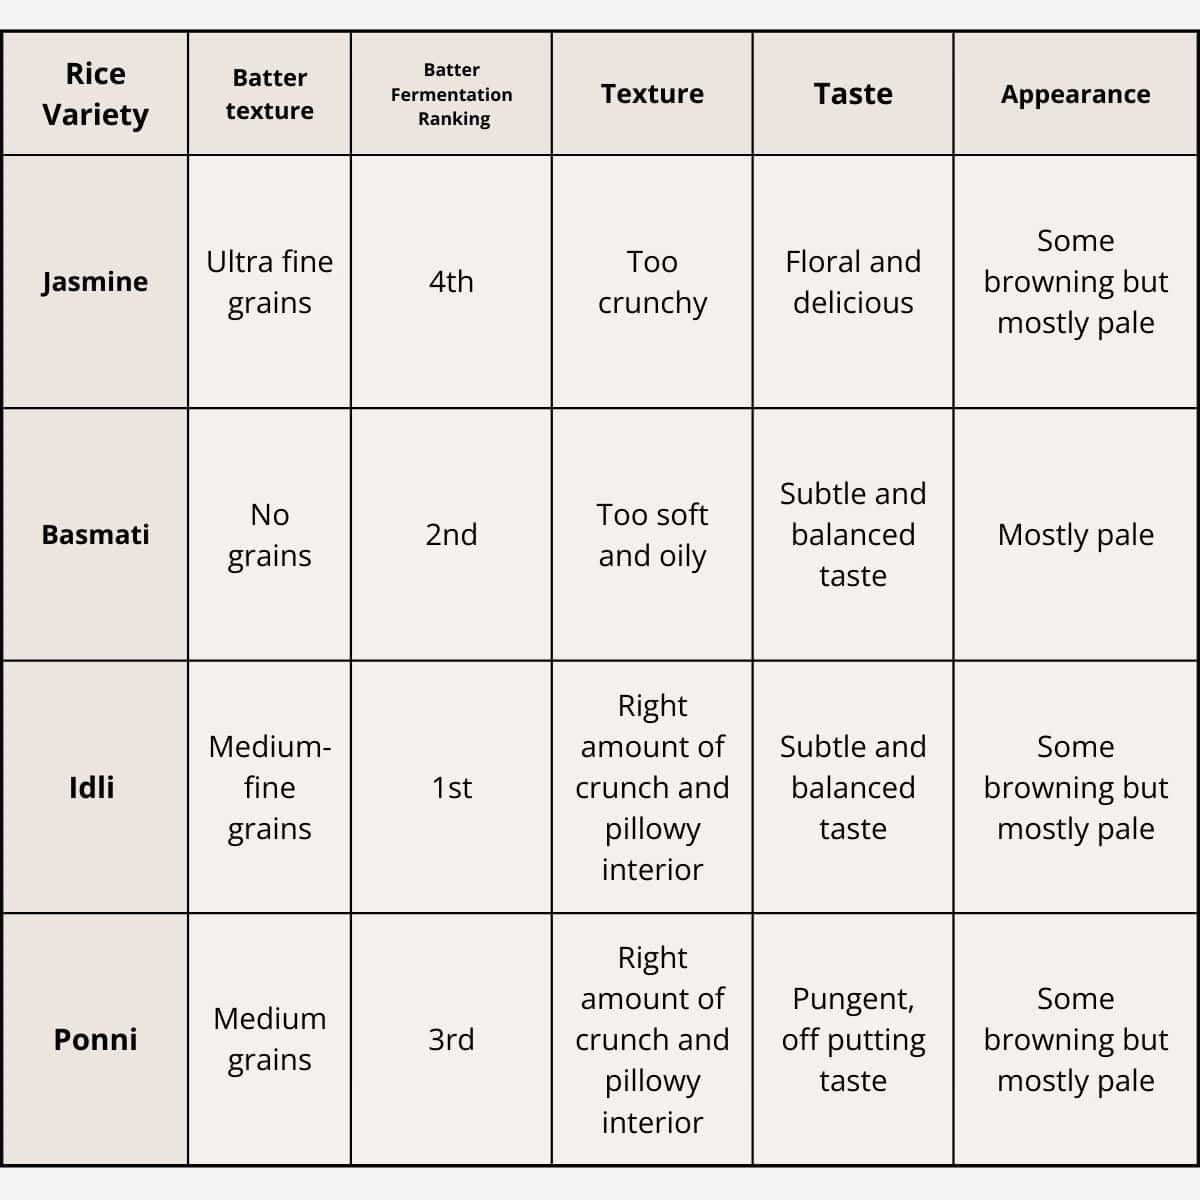 Table showing different rice varieties, their batter texture, fermentation ranking, texture, taste, and appearance. Rice Variety: Jasmine, Batter texture: Ultra fine grains, Fermentation Ranking: 4th, Texture: Too crunchy, Taste: Floral and delicious, Appearance: Some browning but mostly pale. Rice Variety: Basmati, Batter texture: No grains, Fermentation Ranking: 2nd, Texture: Too soft and oily, Taste: Subtle and balanced taste, Appearance: Mostly pale. Rice Variety: Idli, Batter texture: Medium-fine grains, Fermentation Ranking: 1st, Texture: Right amount of crunch and pillowy interior, Taste: Subtle and balanced taste, Appearance: Some browning but mostly pale. Rice Variety: Ponni, Batter texture: Medium grains, Fermentation Ranking: 3rd, Texture: Right amount of crunch and pillowy interior, Taste: Pungent, off putting taste, Appearance: Some browning but mostly pale.